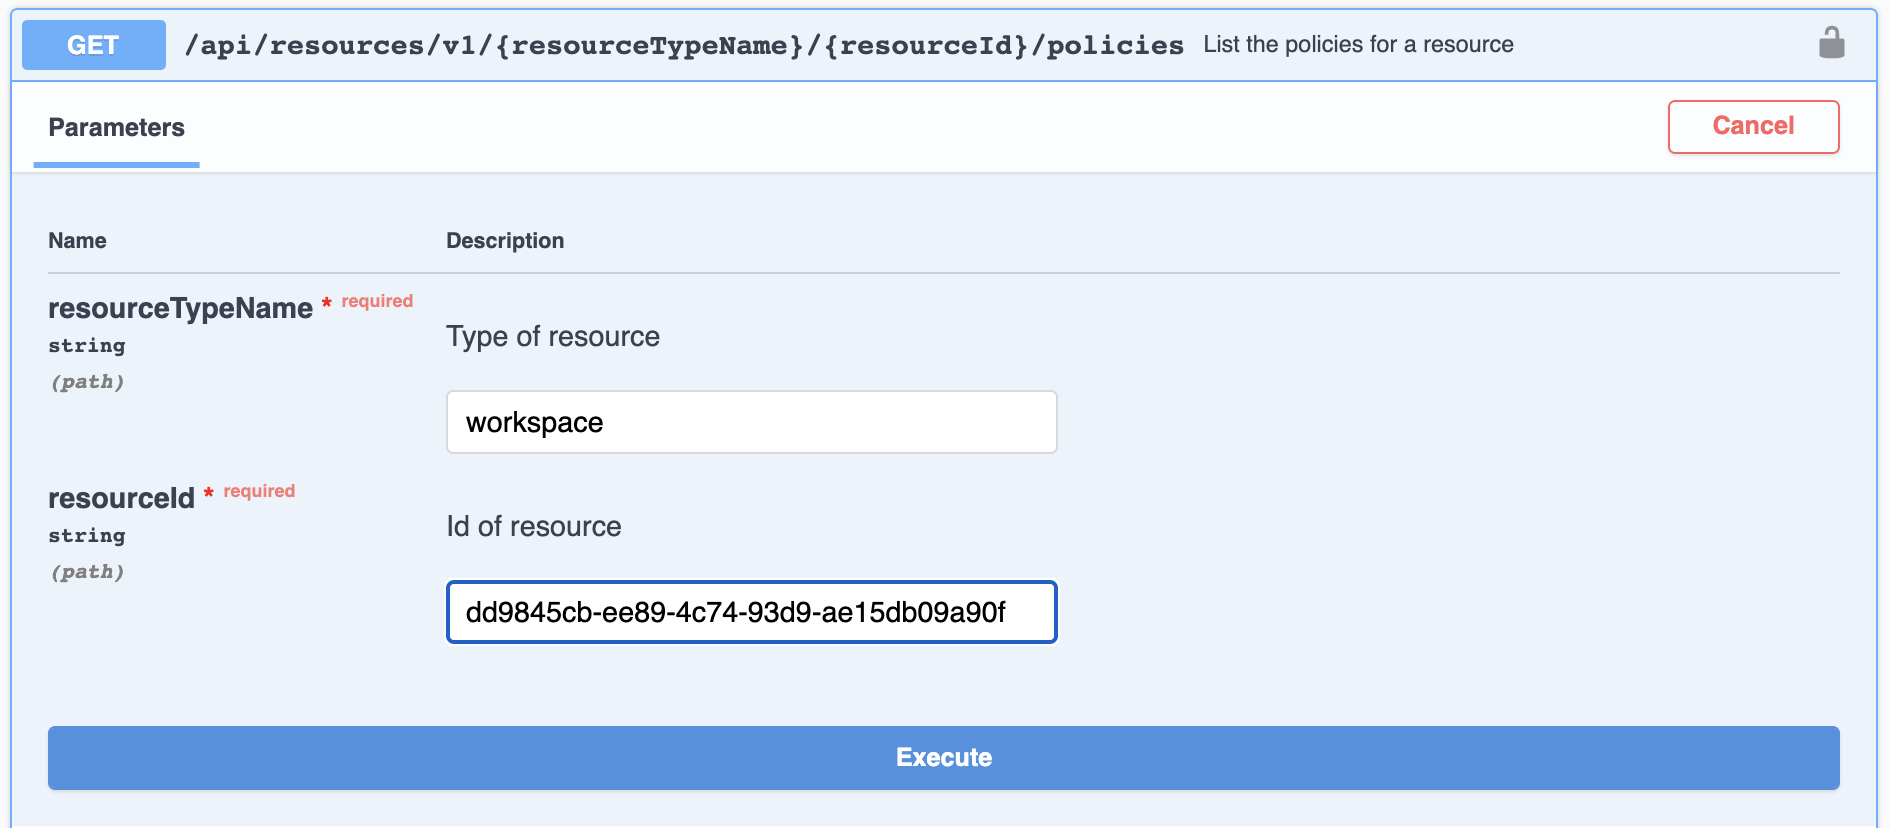 Screenshot of the parameters part of the Swagger page with 'workspace' in the 'Type of resource' field and the Google bucket d5eb5311-1cba-4c8f-84c5-27de52d2efbf in the 'id of resource' field